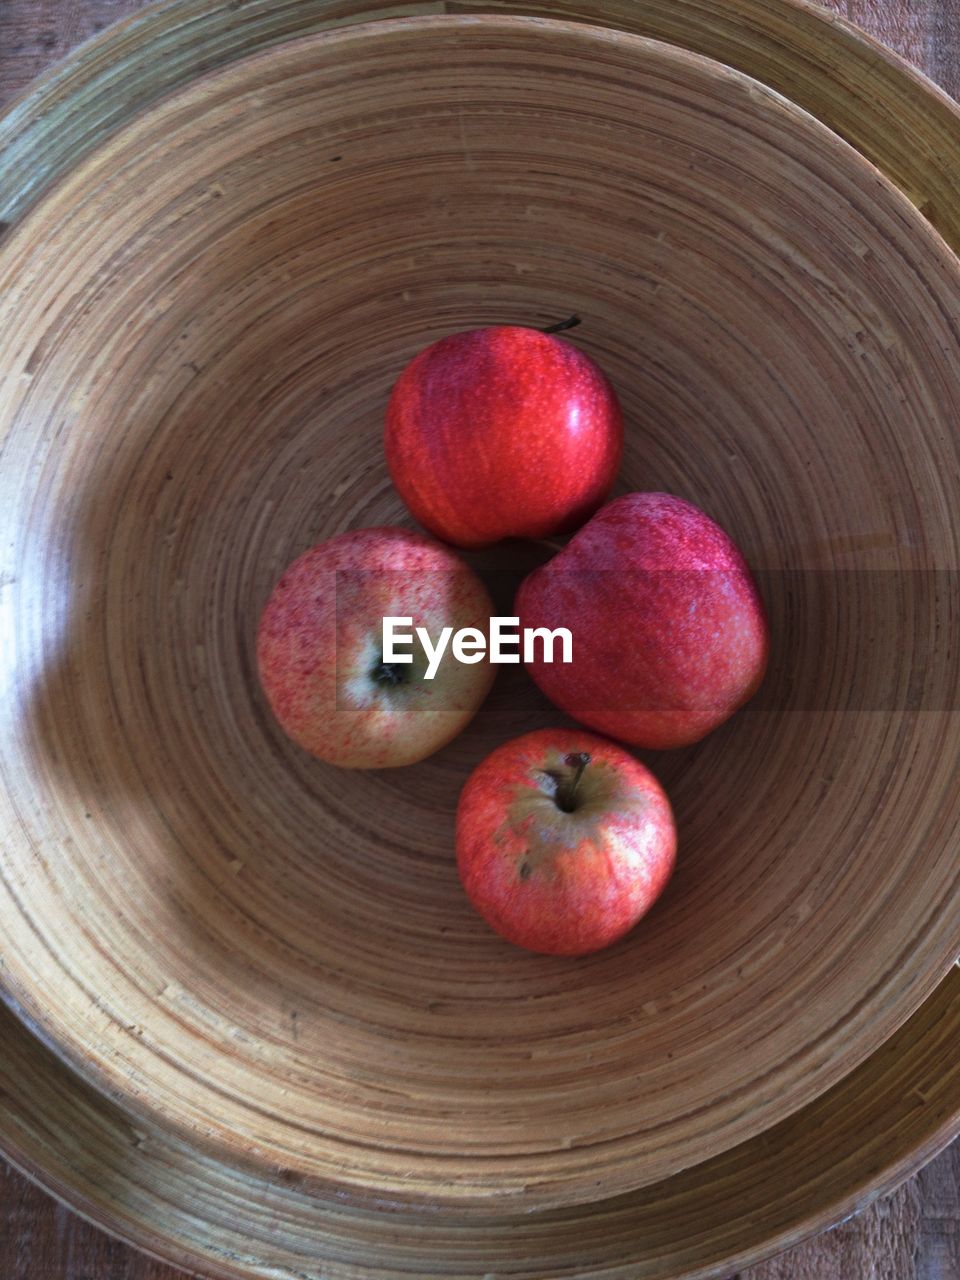 Four apples in a wooden bowl